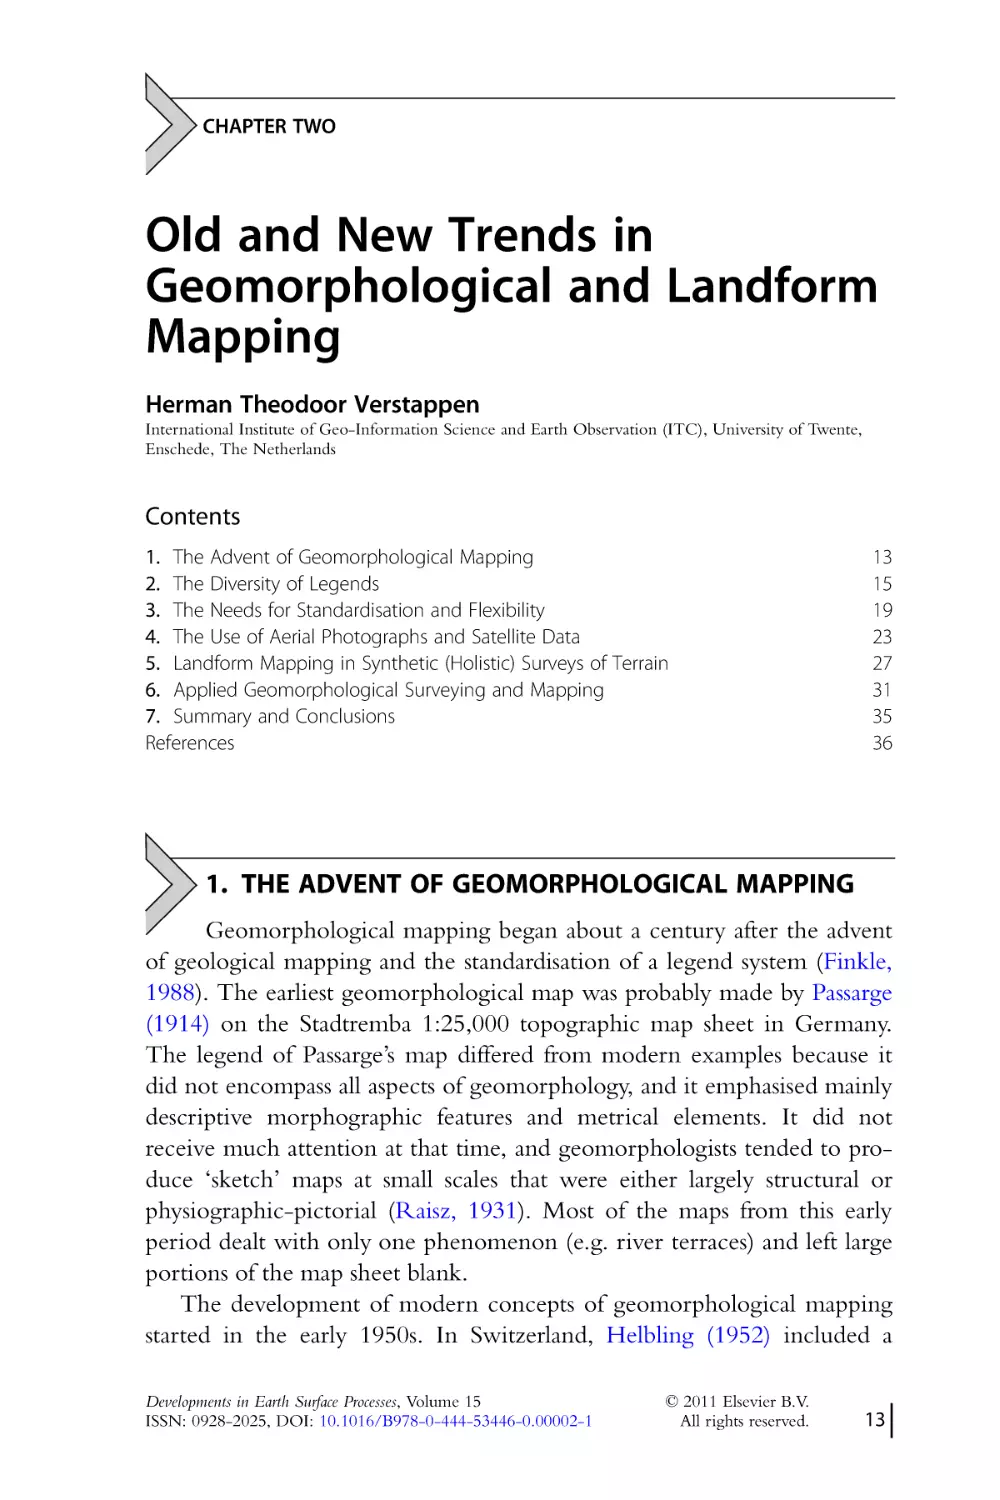 CHAPTER TWO.
Old and New Trends in
Geomorphological and Landform
Mapping
1. The Advent of Geomorphological Mapping